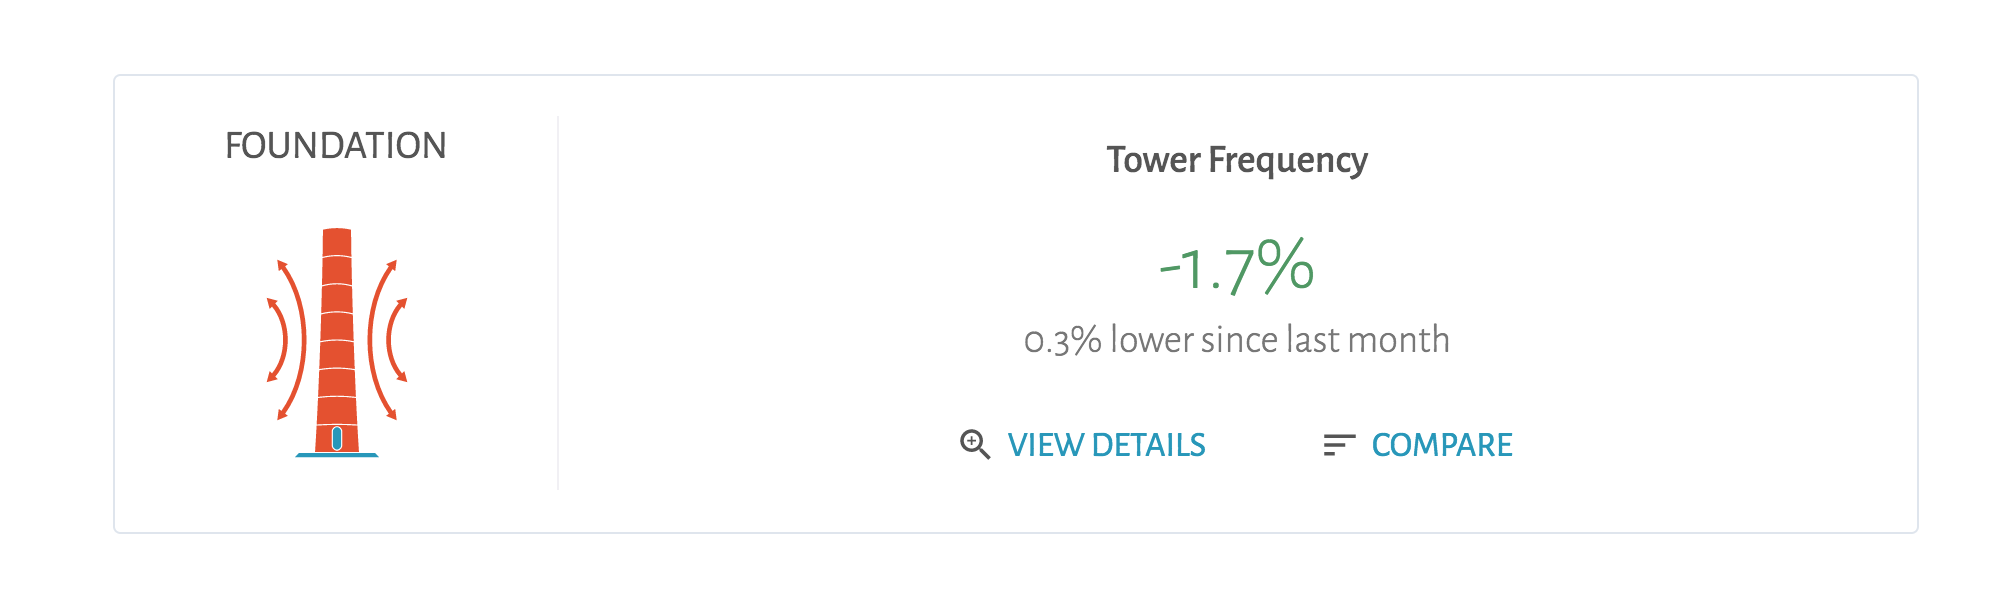 Detailed Tower Frequency Reports